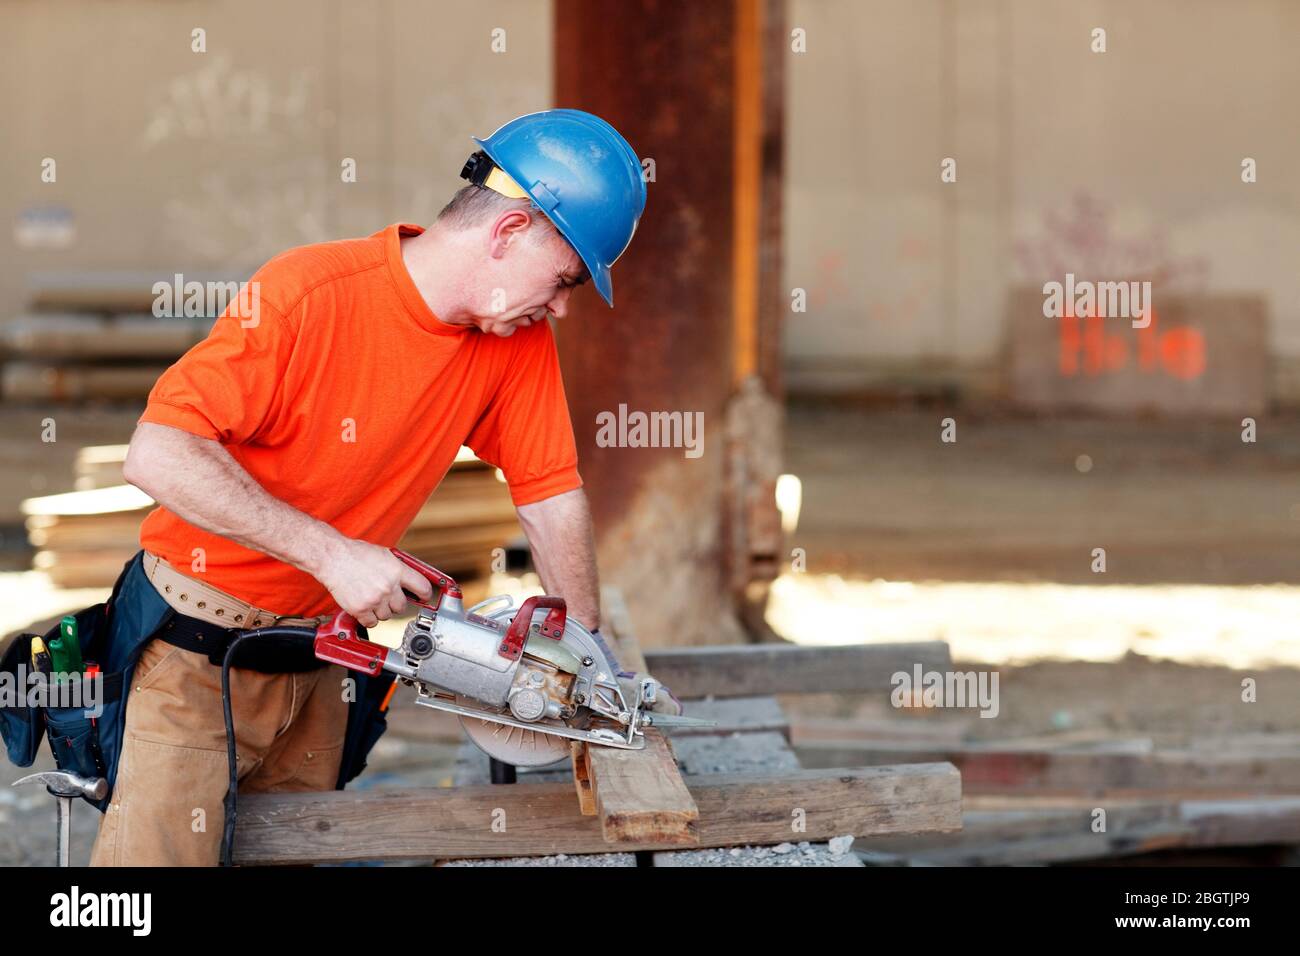 Male construction worker making wood cut Stock Photo